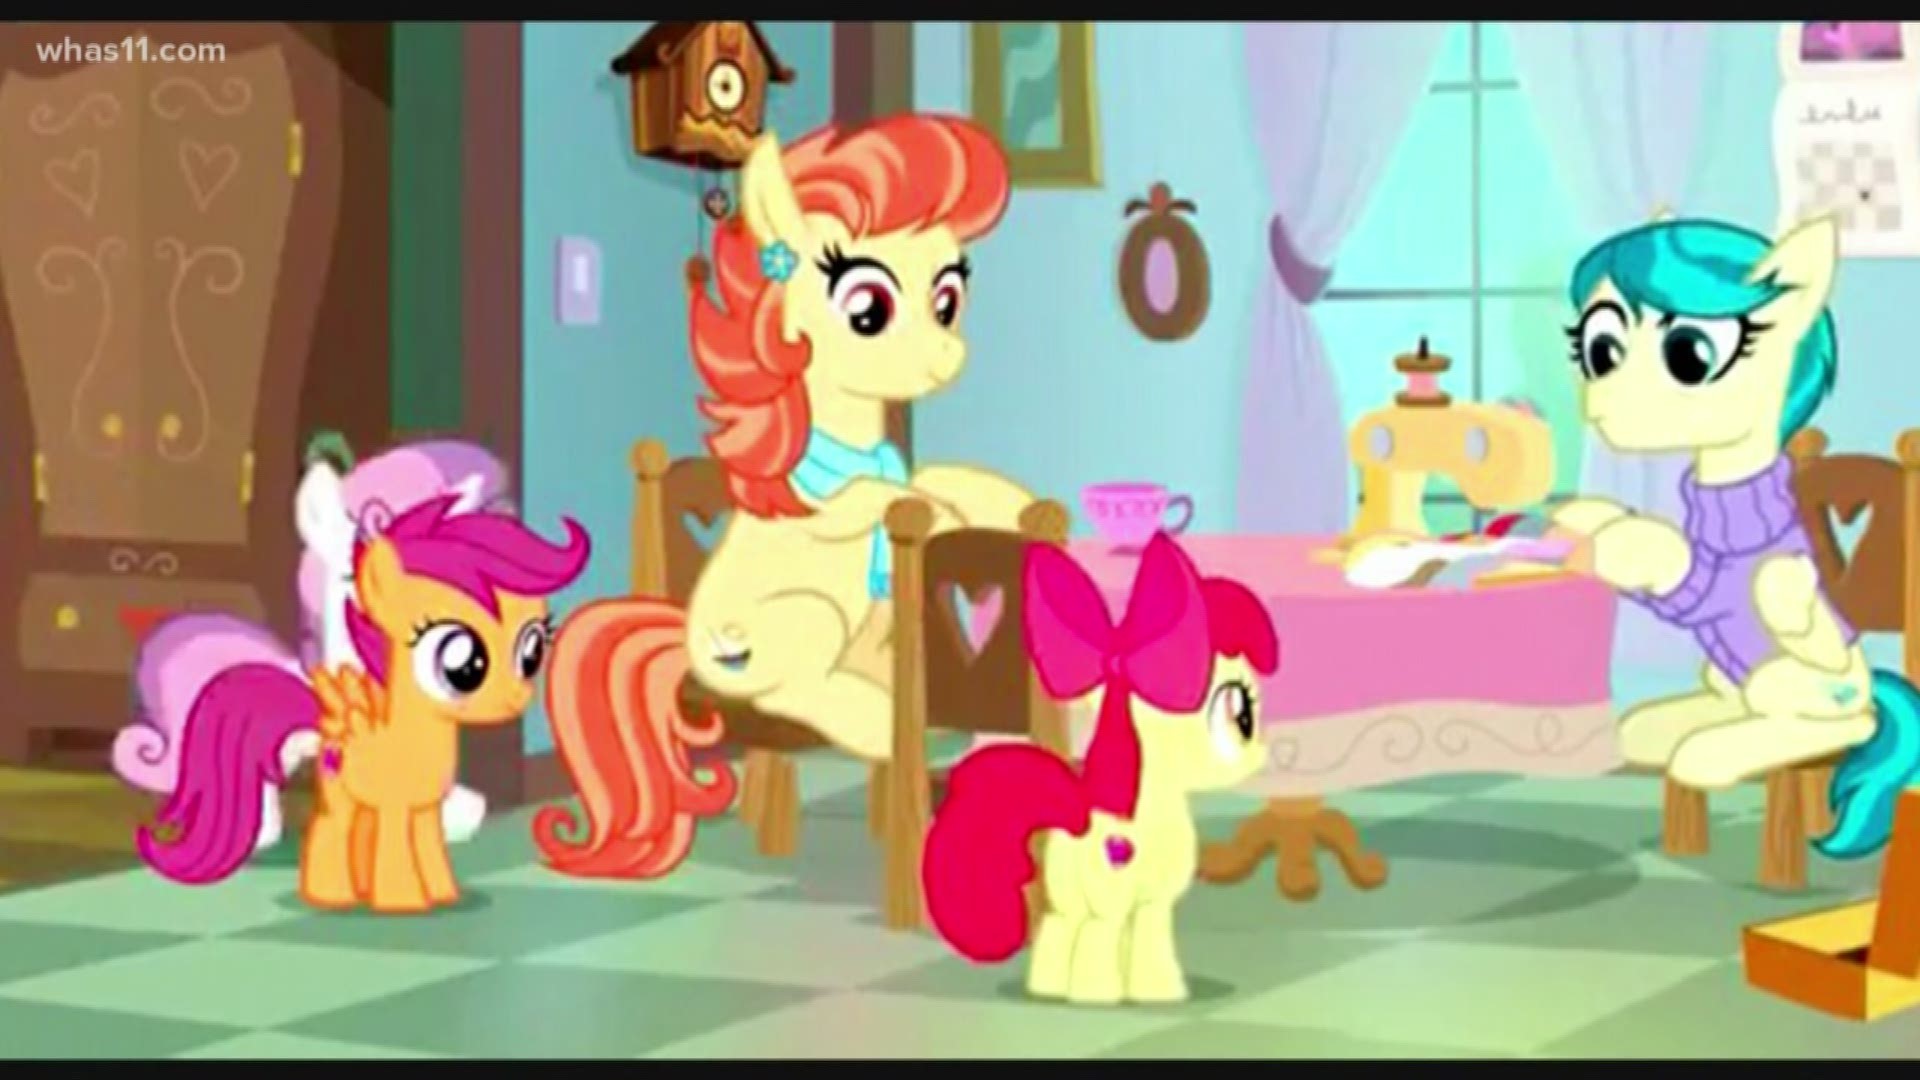 It's a trend that's starting to appear in children's television shows: Families with same-sex parents. My Little Pony is the latest show to have the theme.